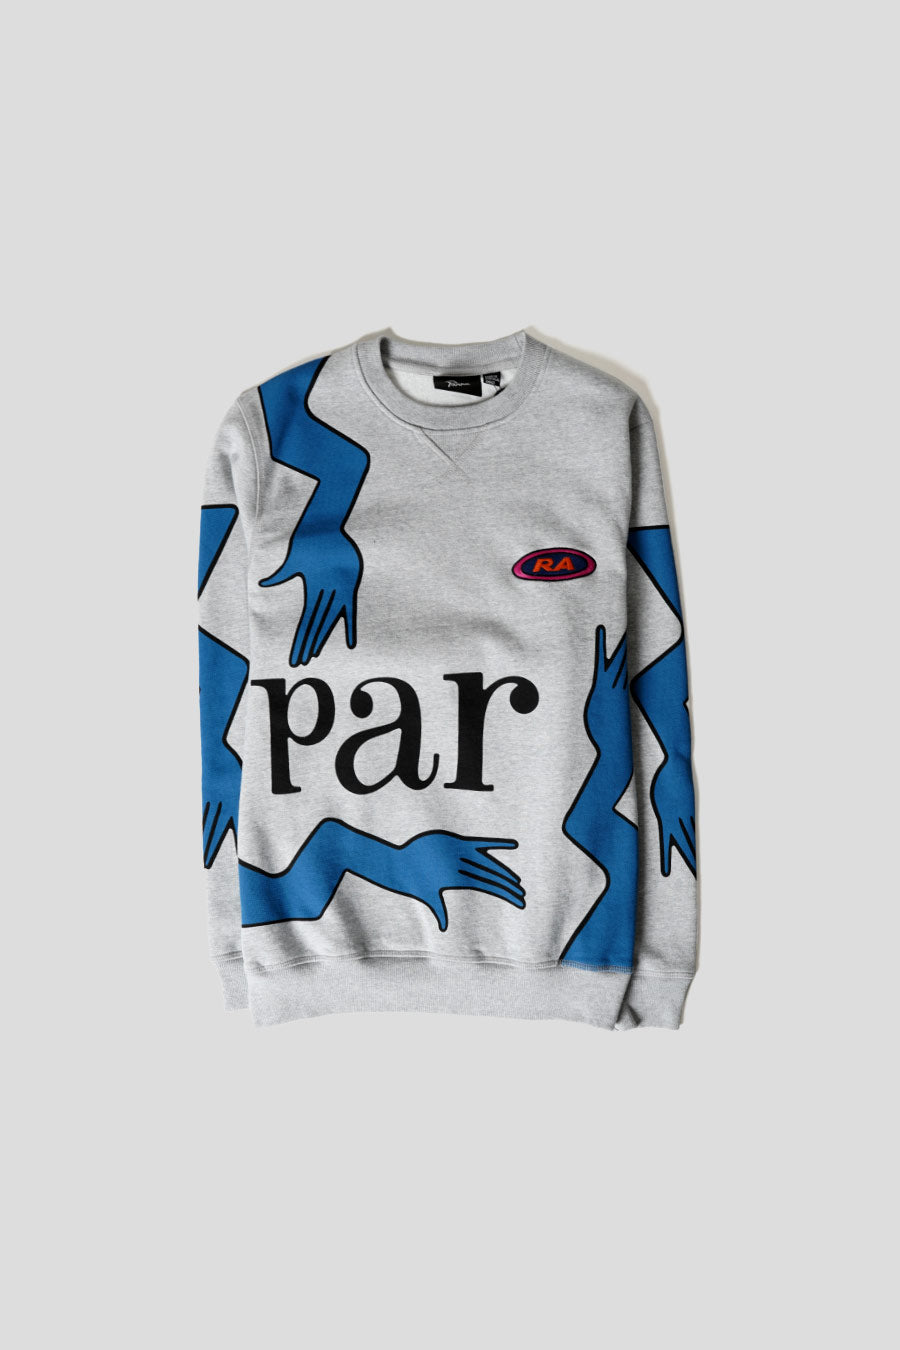 BY PARRA - SWEAT-SHIRT EARLY GRAB GRIS - LE LABO STORE